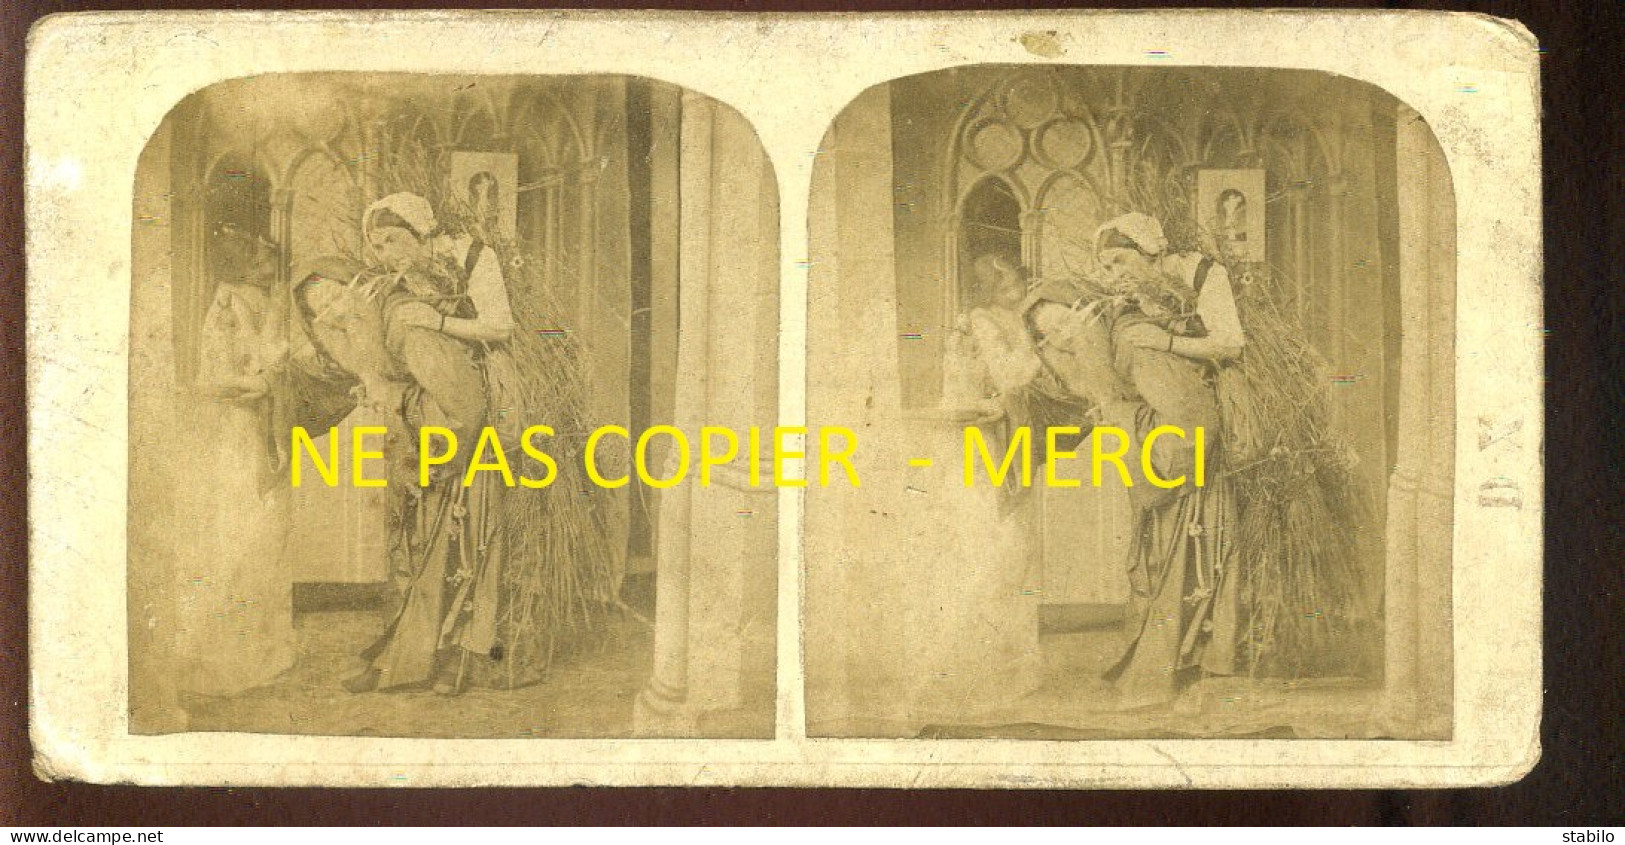 PHOTO STEREO - L'ENTREE AU COUVENT - FORMAT 17 X 8.5 CM - Stereoscopic